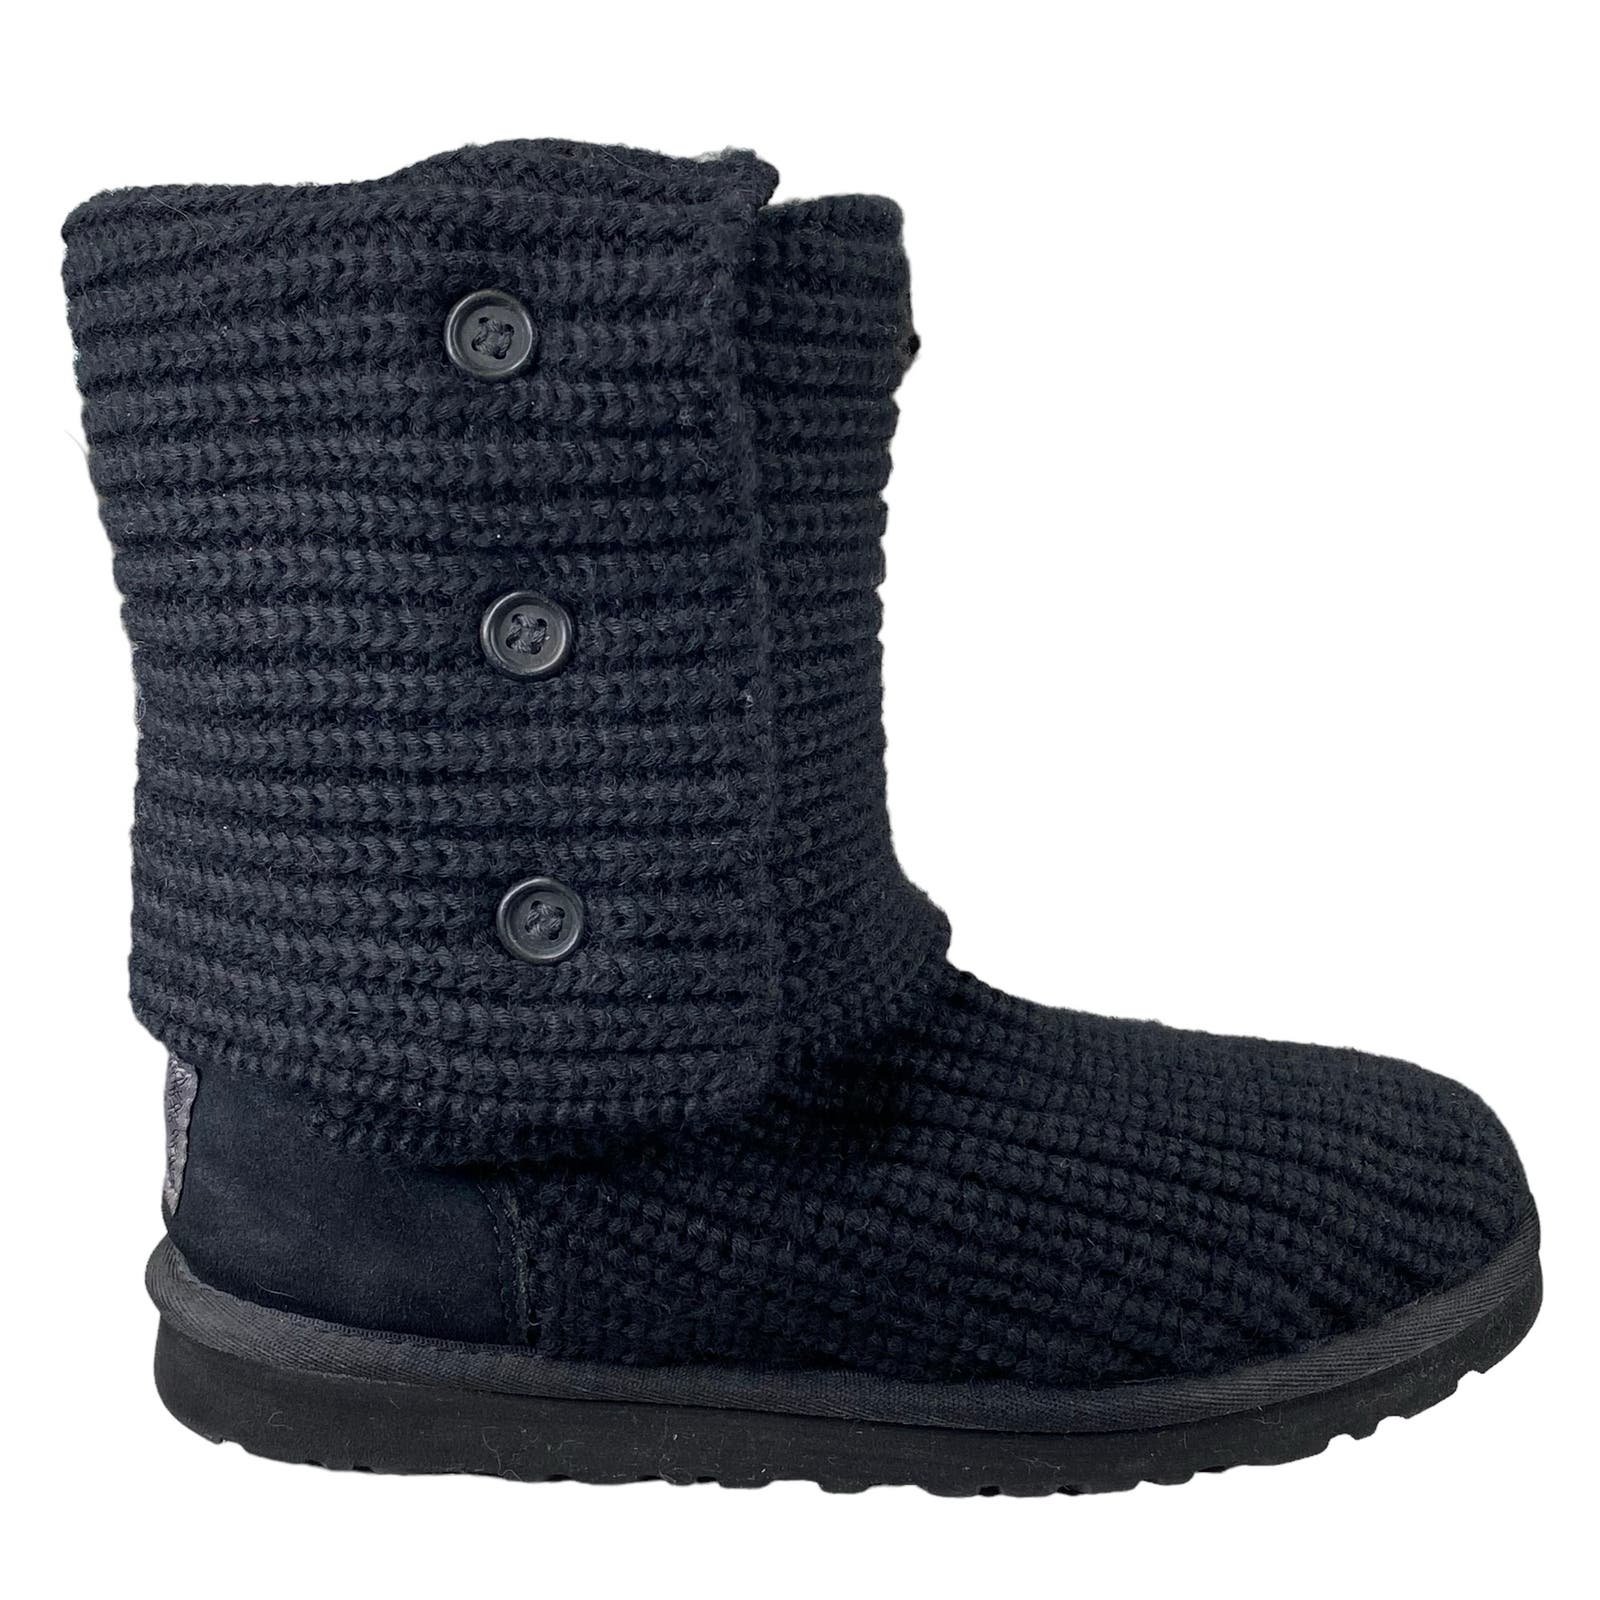 UGG Women’s Black Cardy Pull On Winter Boot Size US 6 B